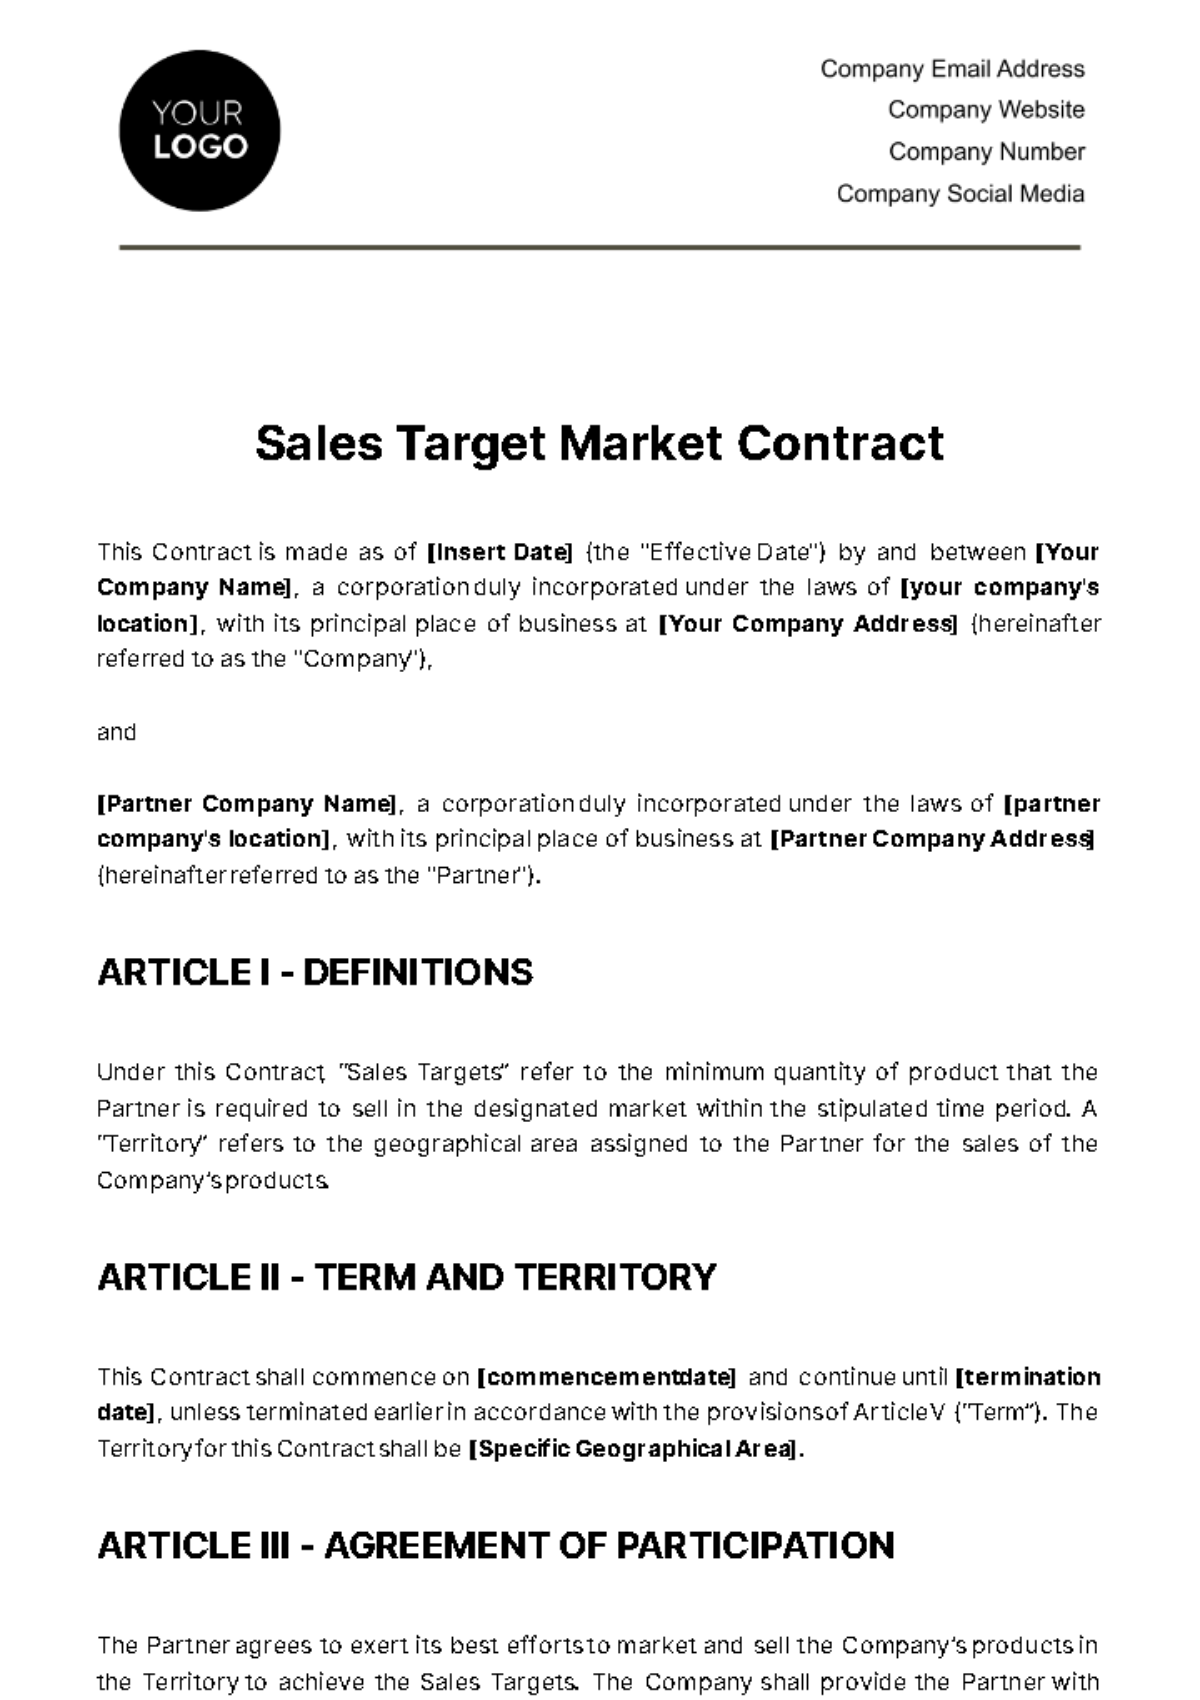 Free Sales Target Market Contract Template